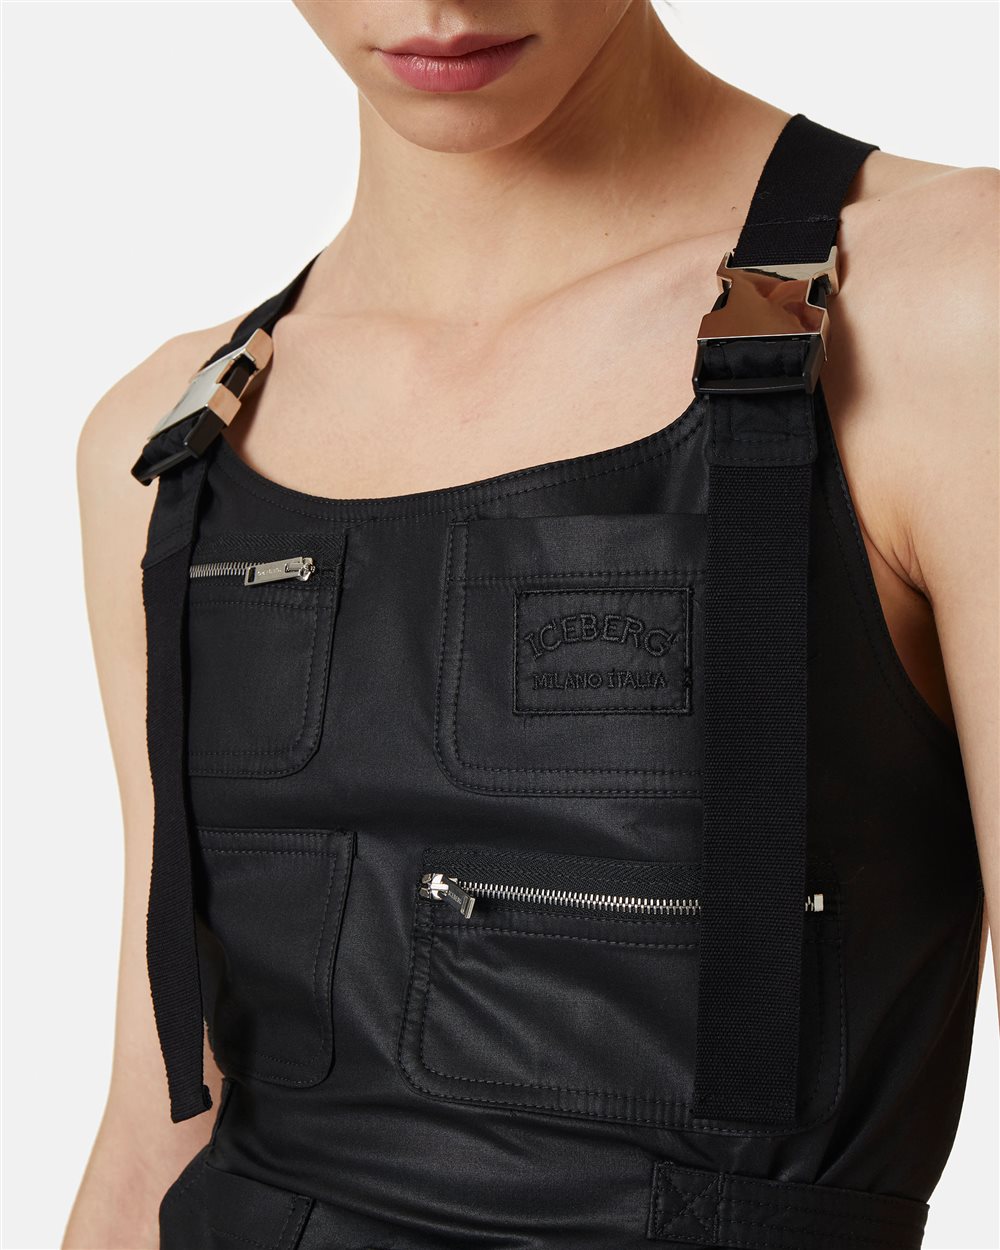 Top with buckles and pockets - Iceberg - Official Website